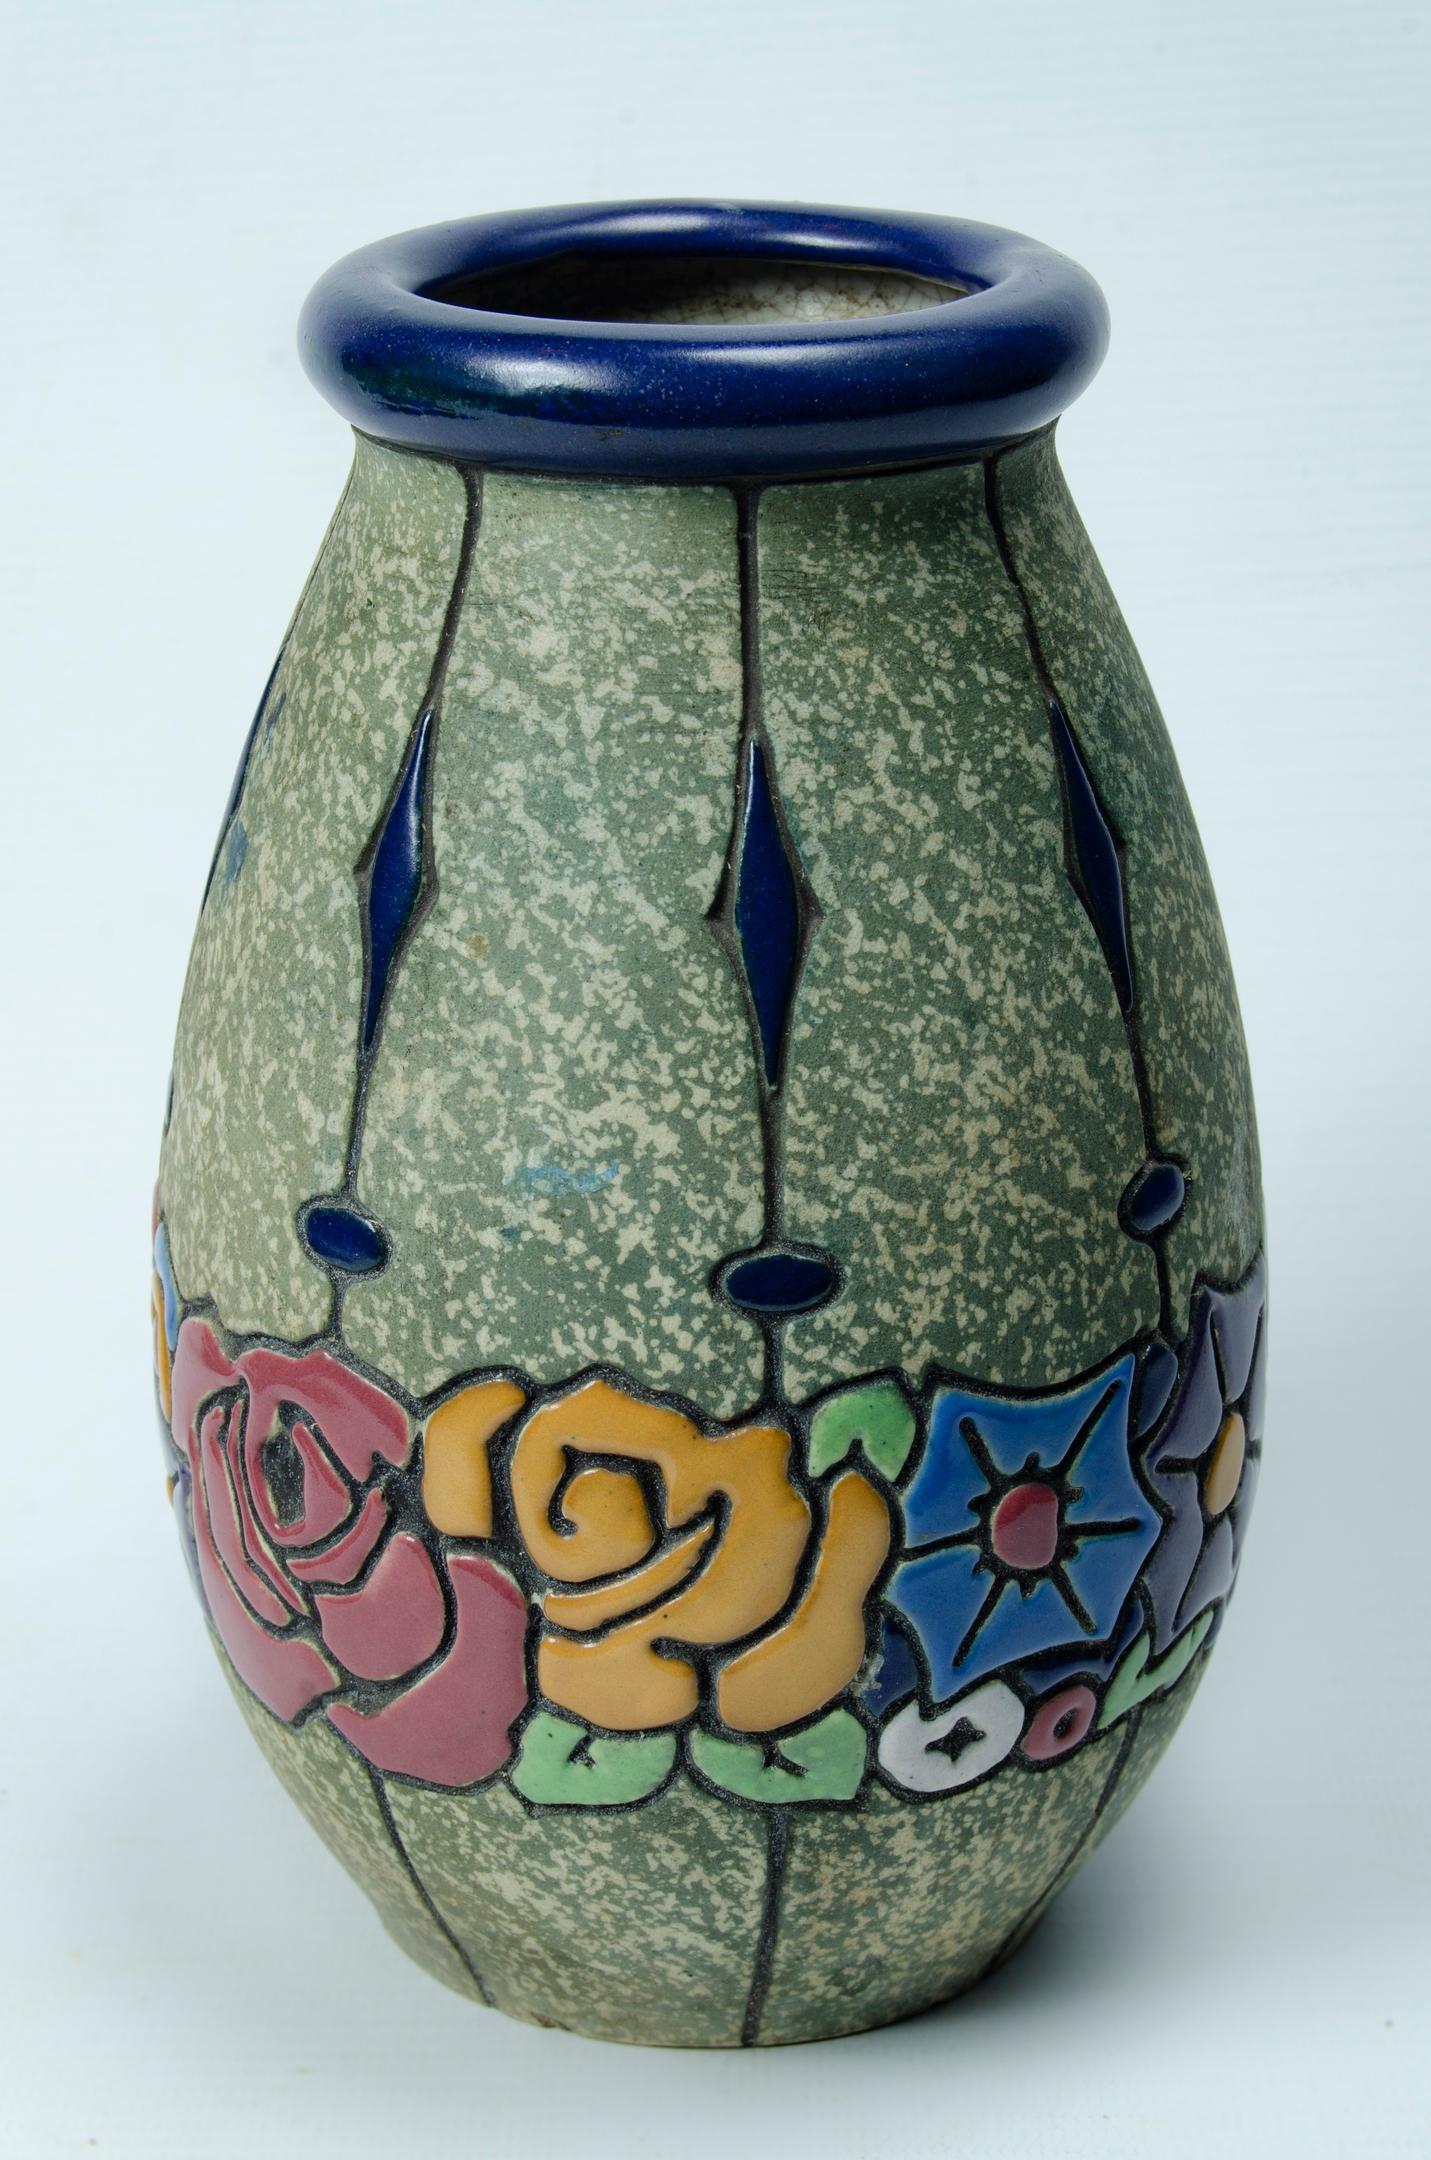 Ceramics Anphora Art deco period
Origin Czech Rep. Floral motif
sealed at its base
the piece is in perfect condition
circa 1920.